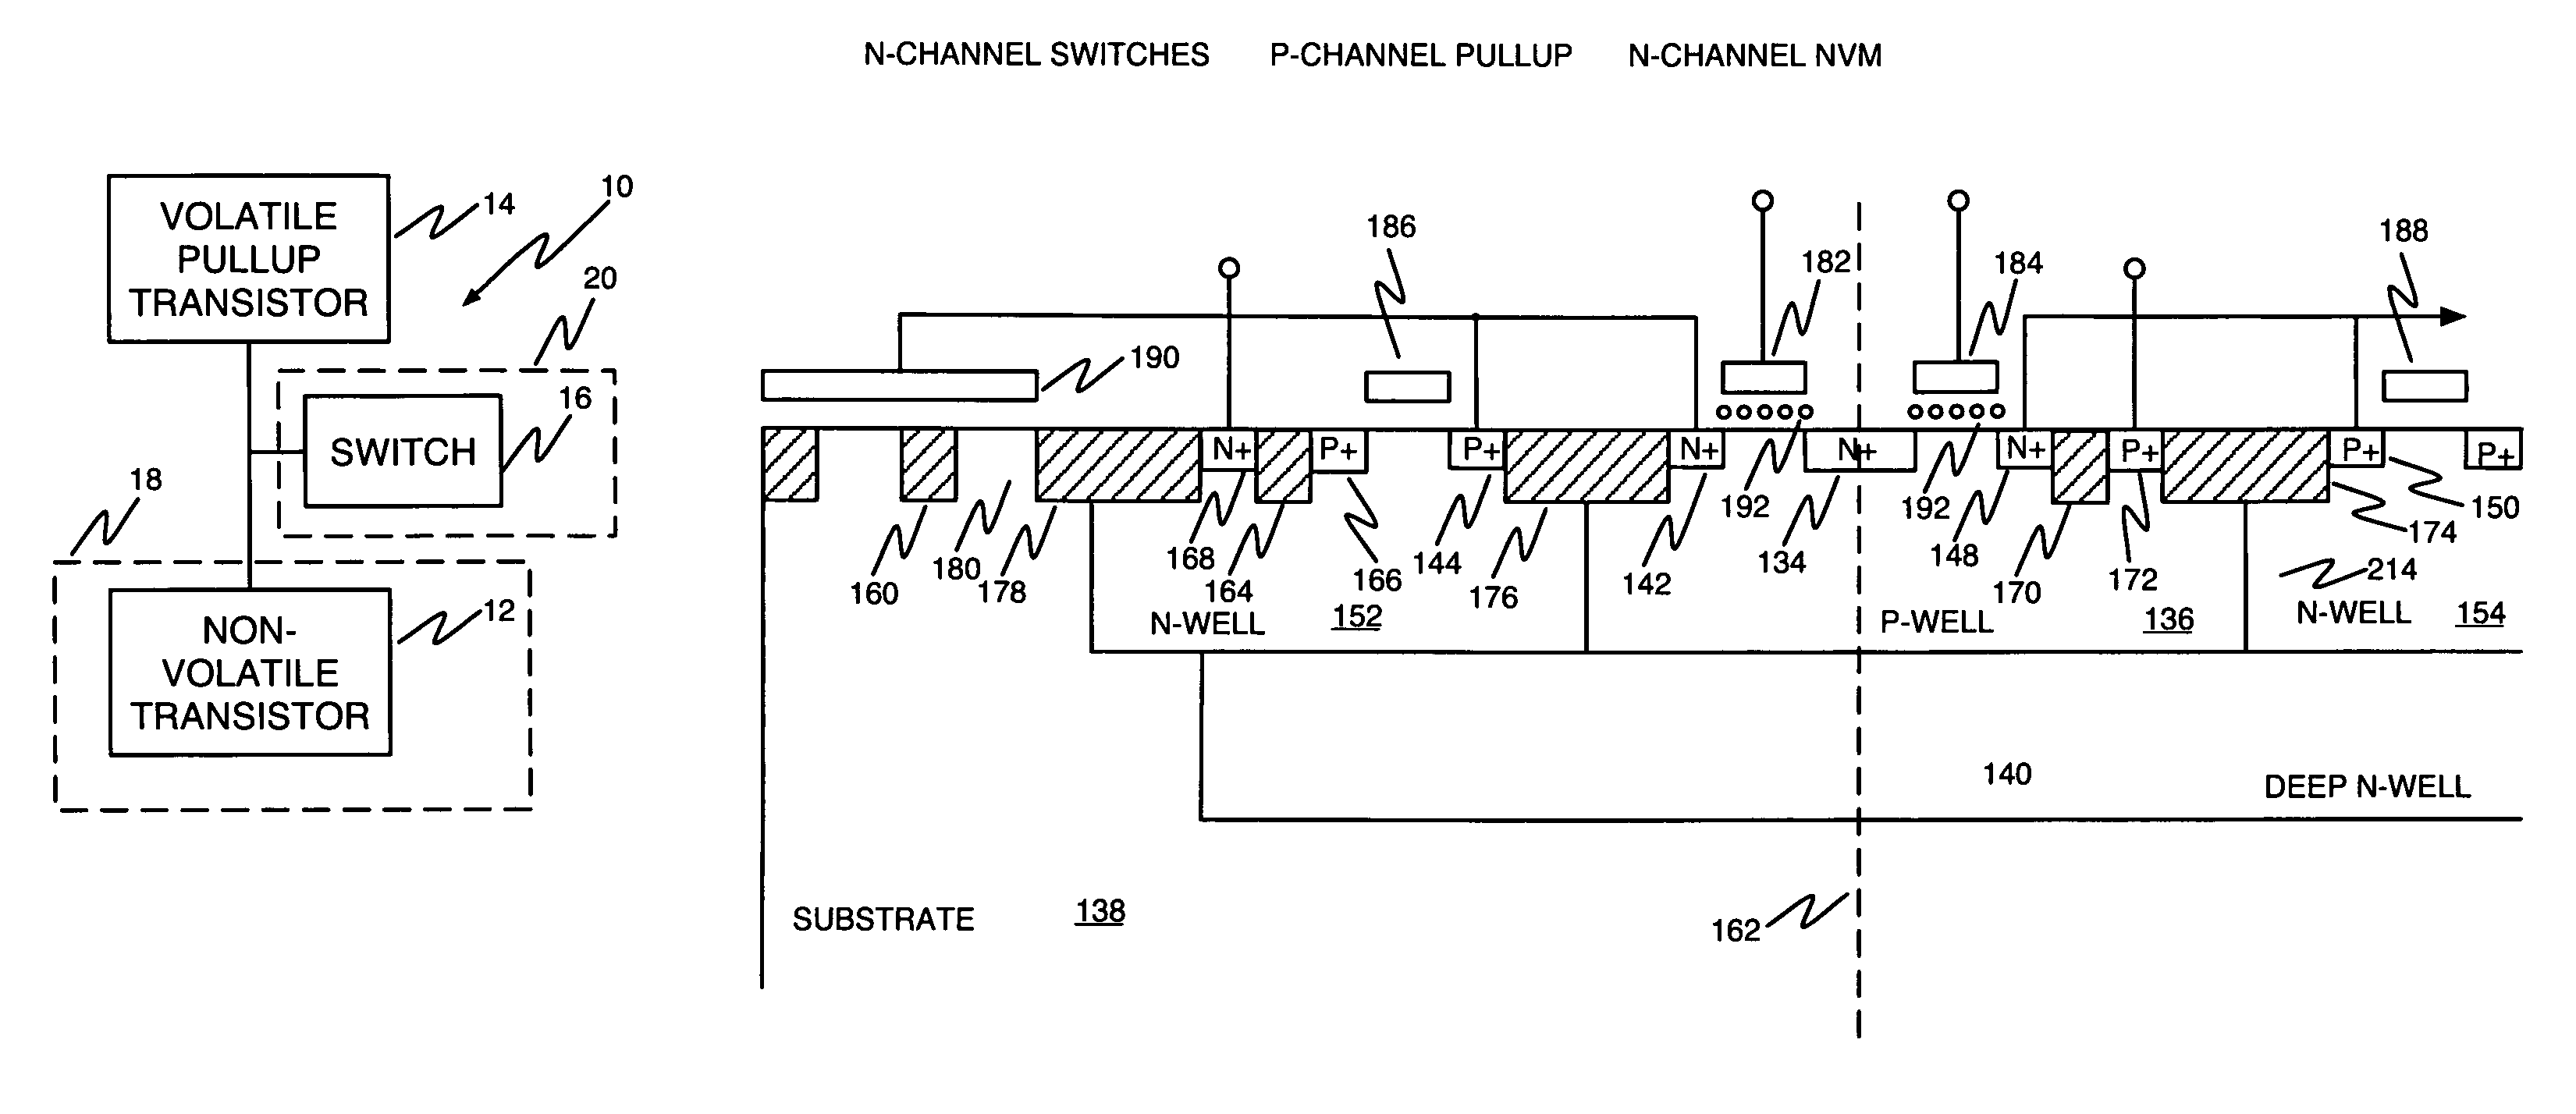 Non-volatile programmable memory cell and array for programmable logic array